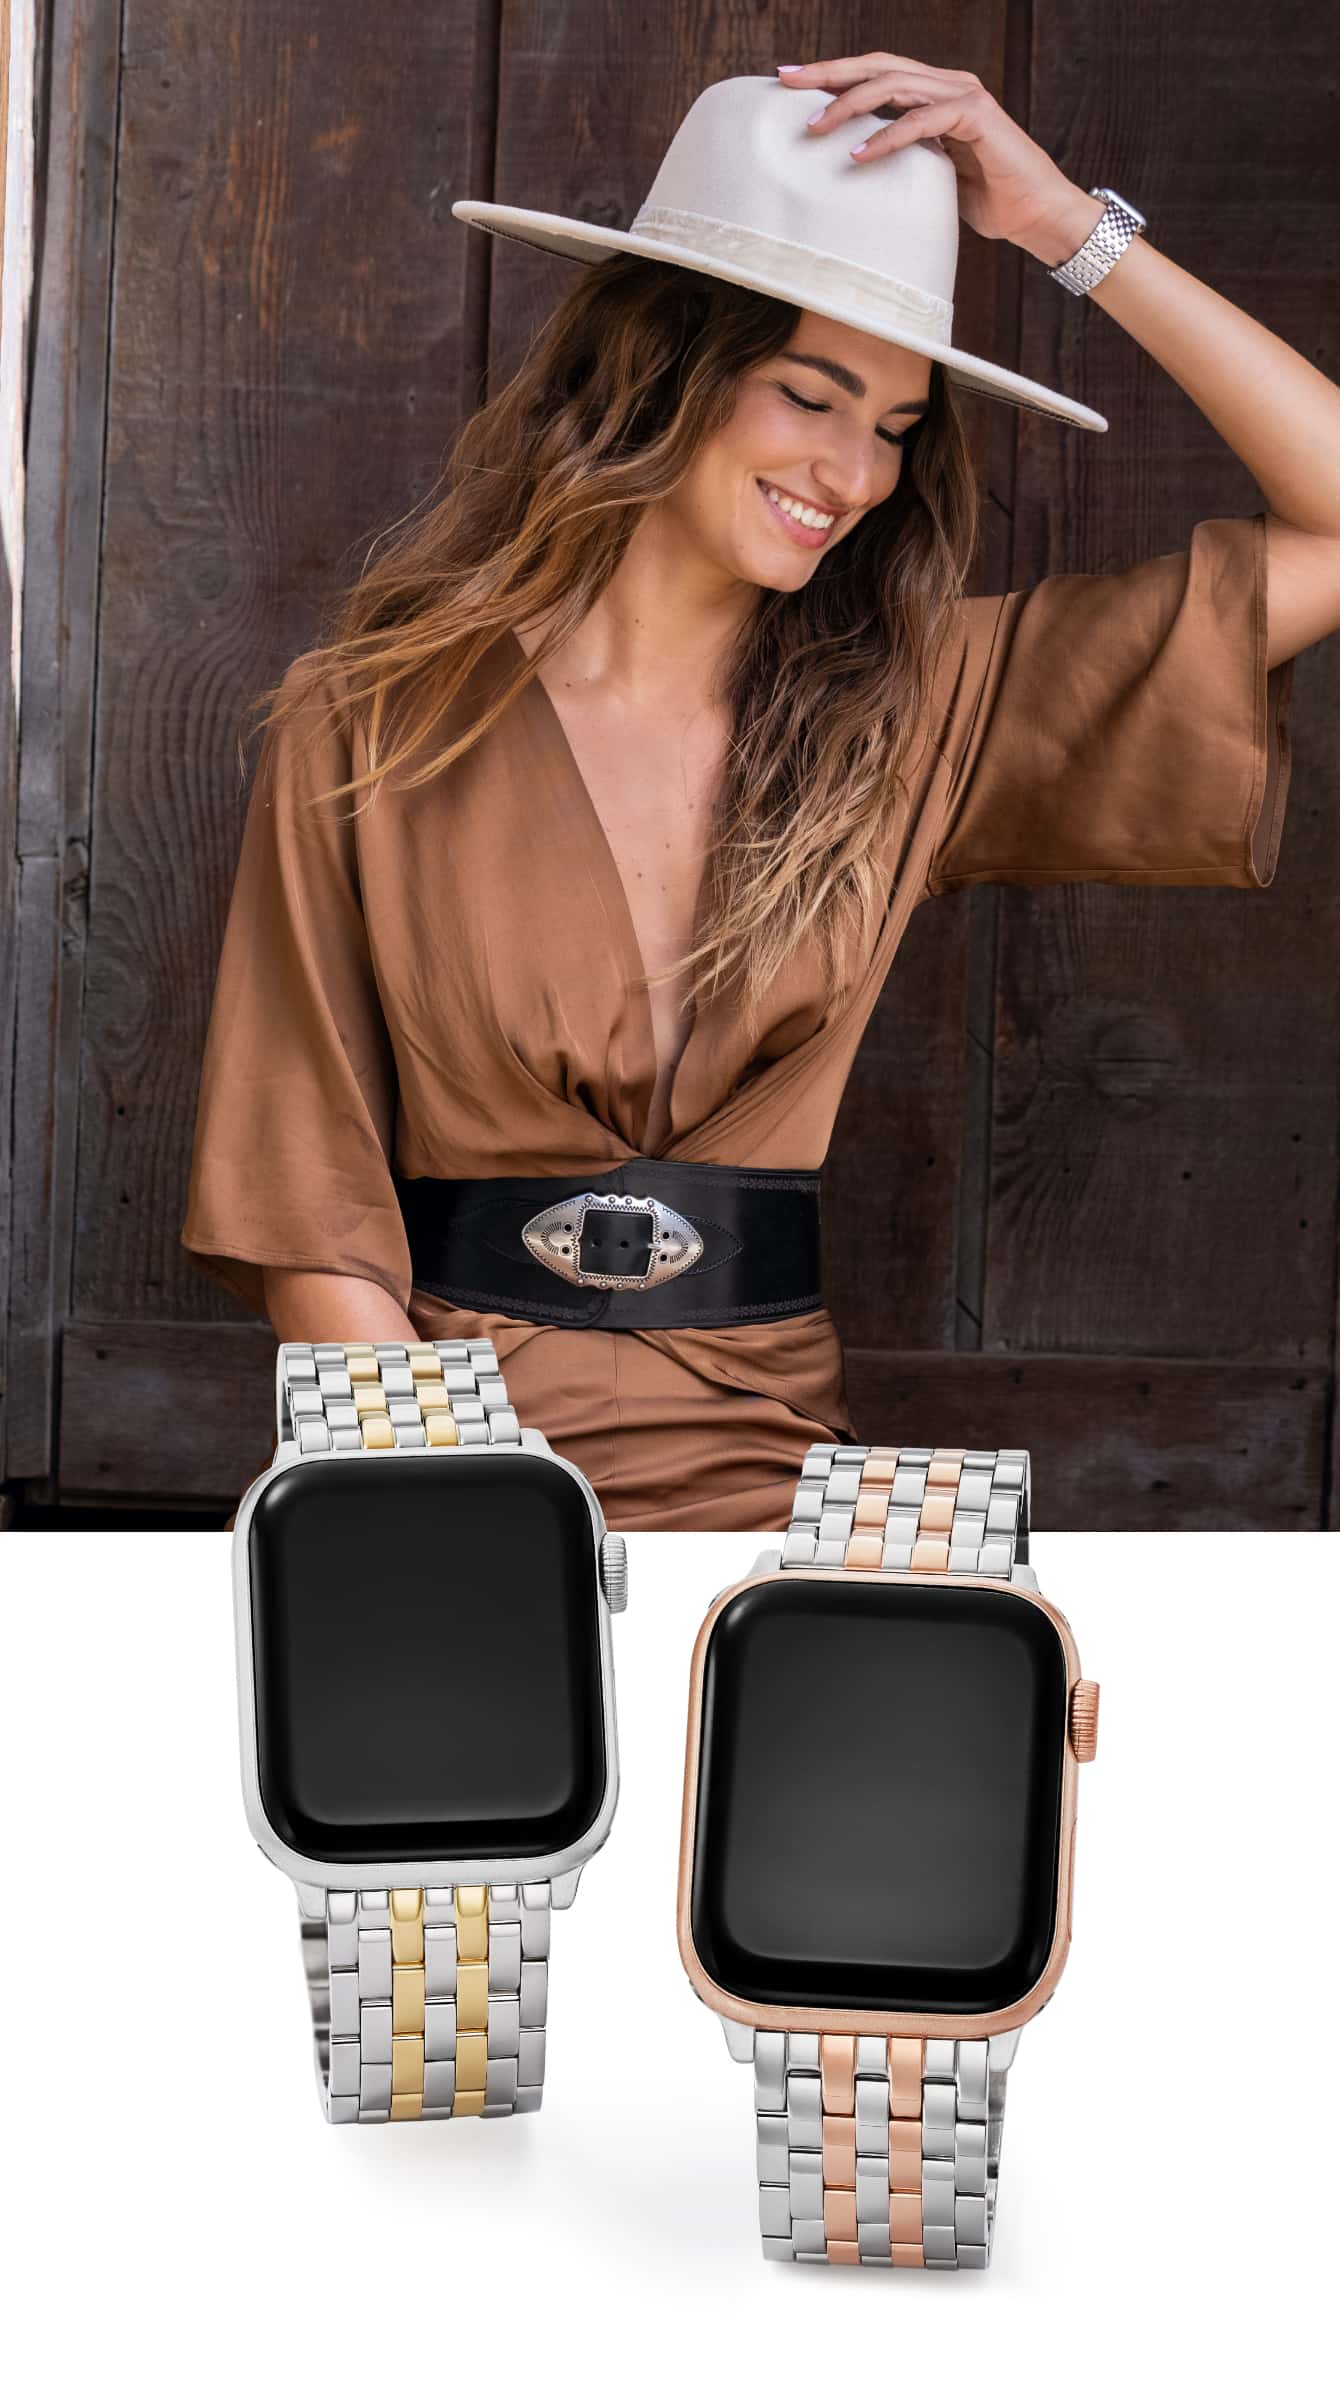 Stylish woman wearing a hat and a watch with a Michele band for Apple Watch.